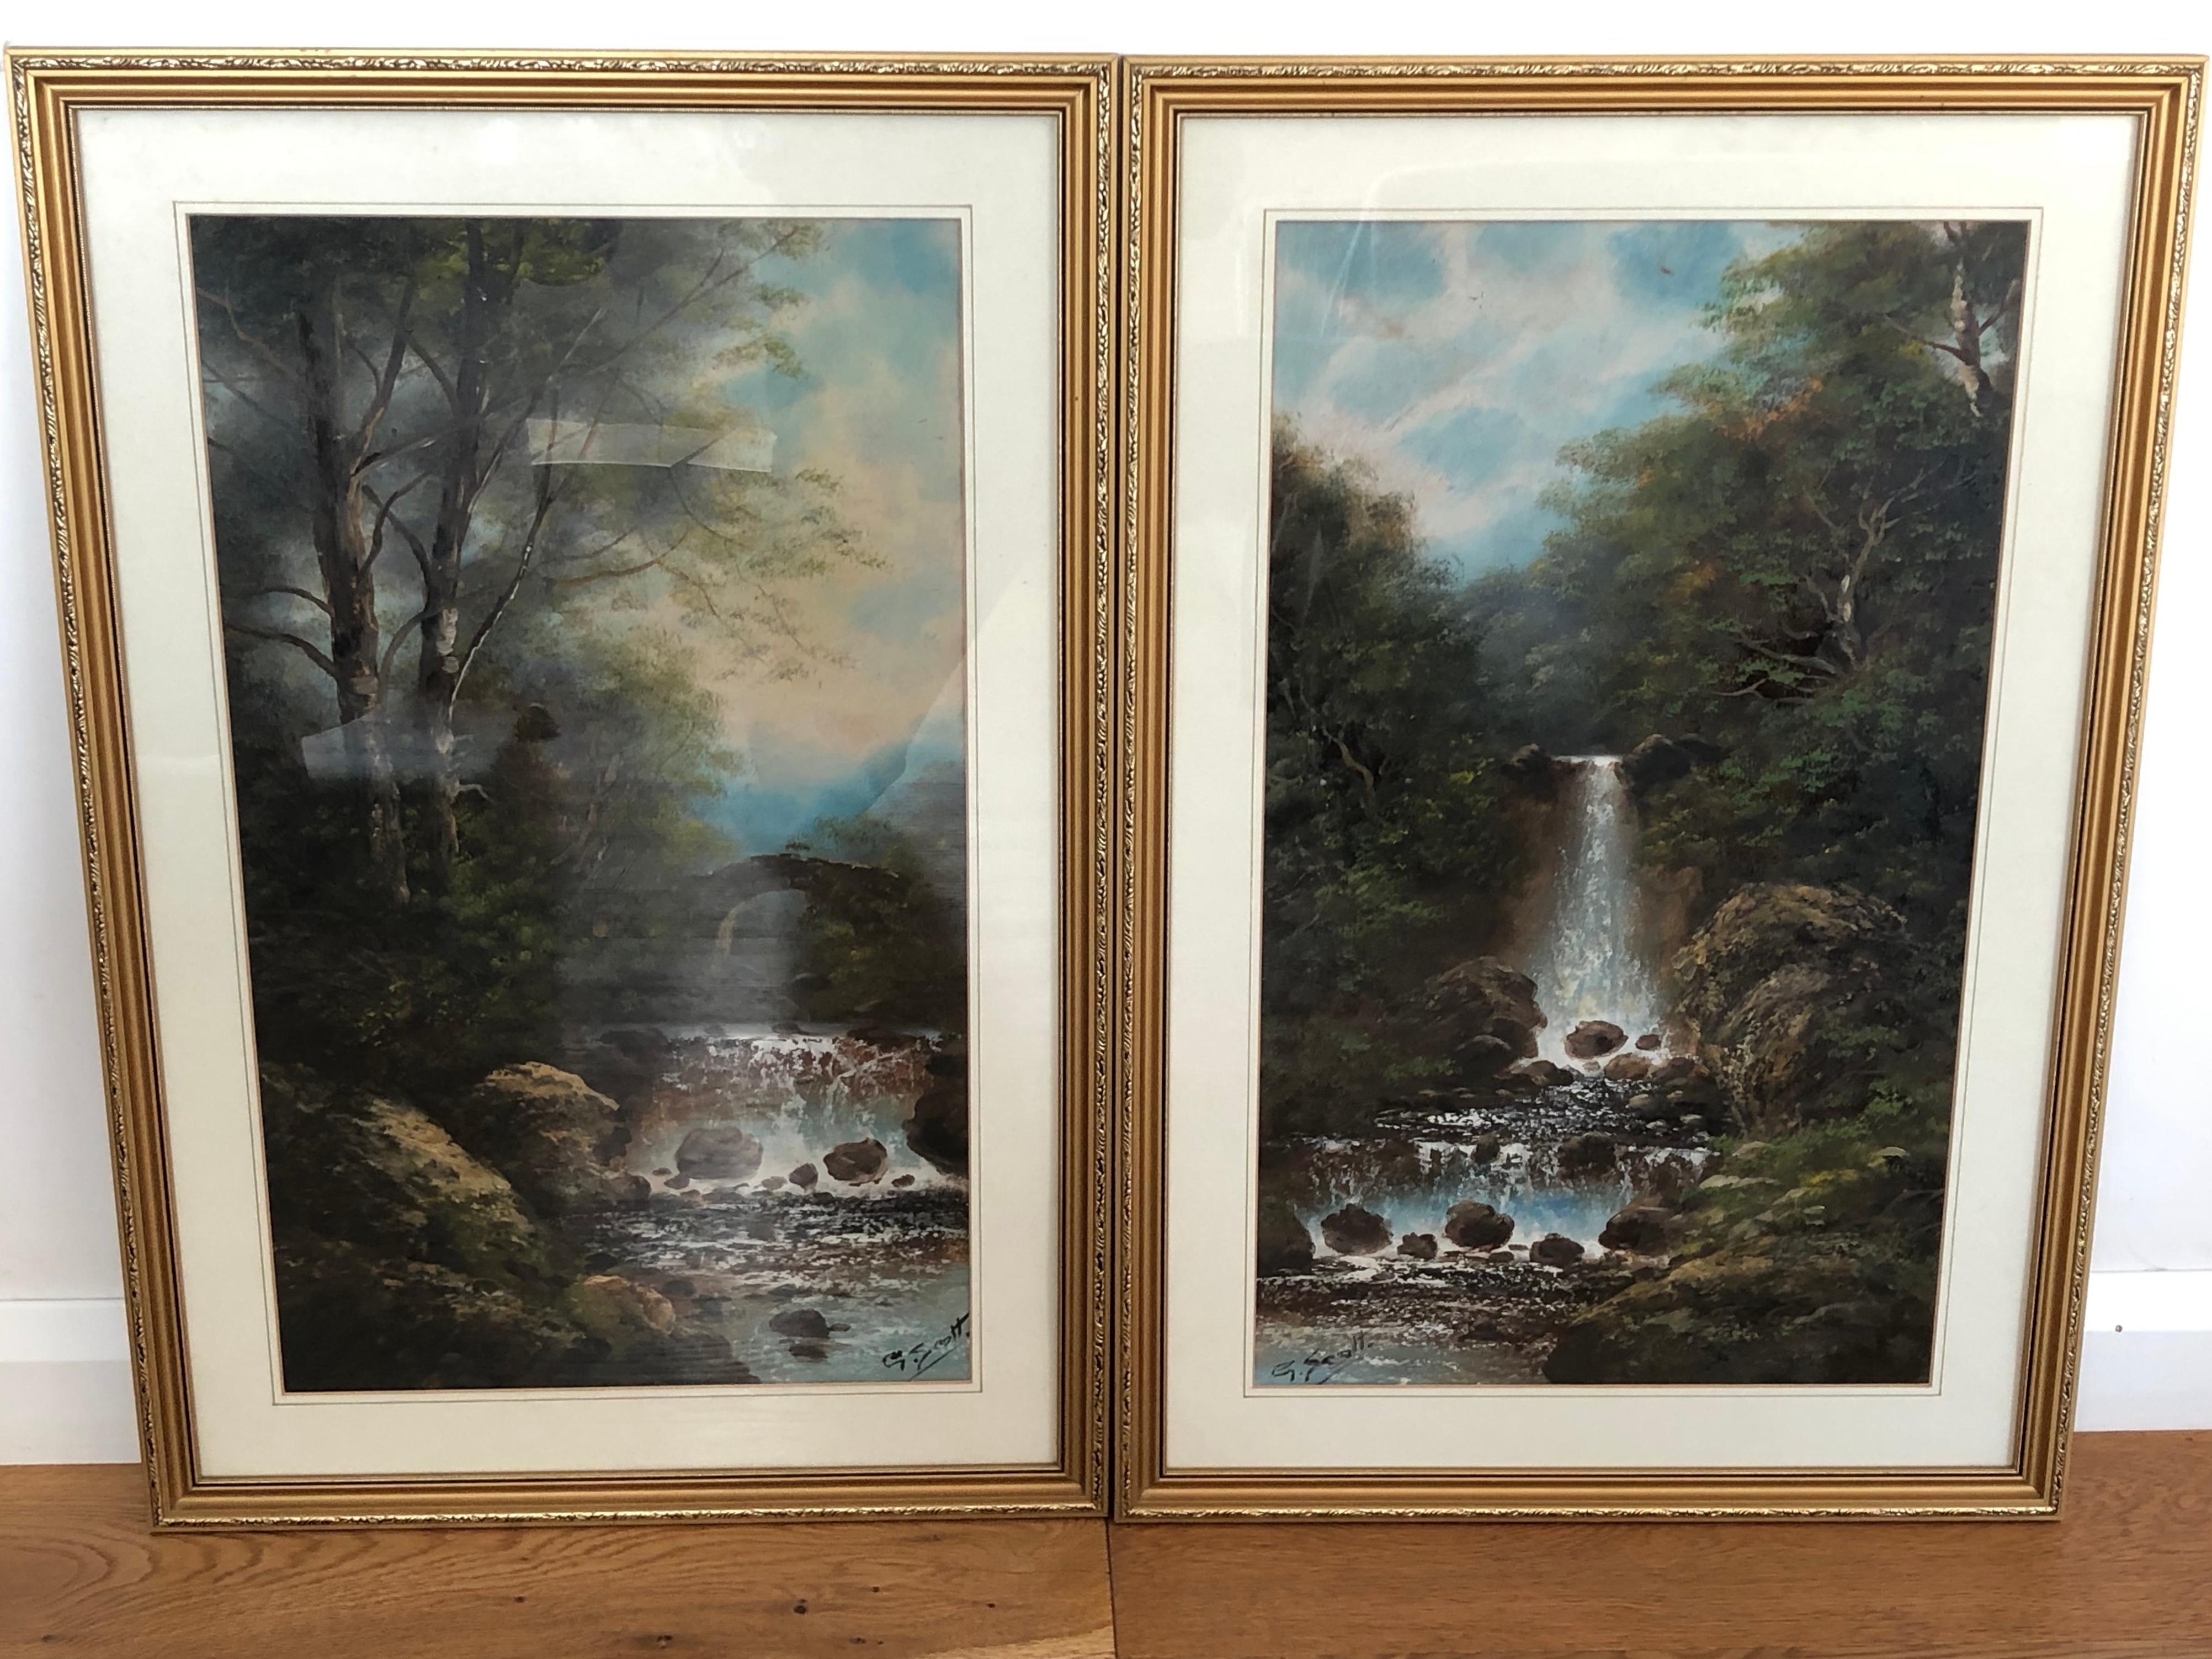 A pair of early 20th century English landscapes. Watercolor on board, fair condition behind glass. Signed G Scott

Measures: Images 24